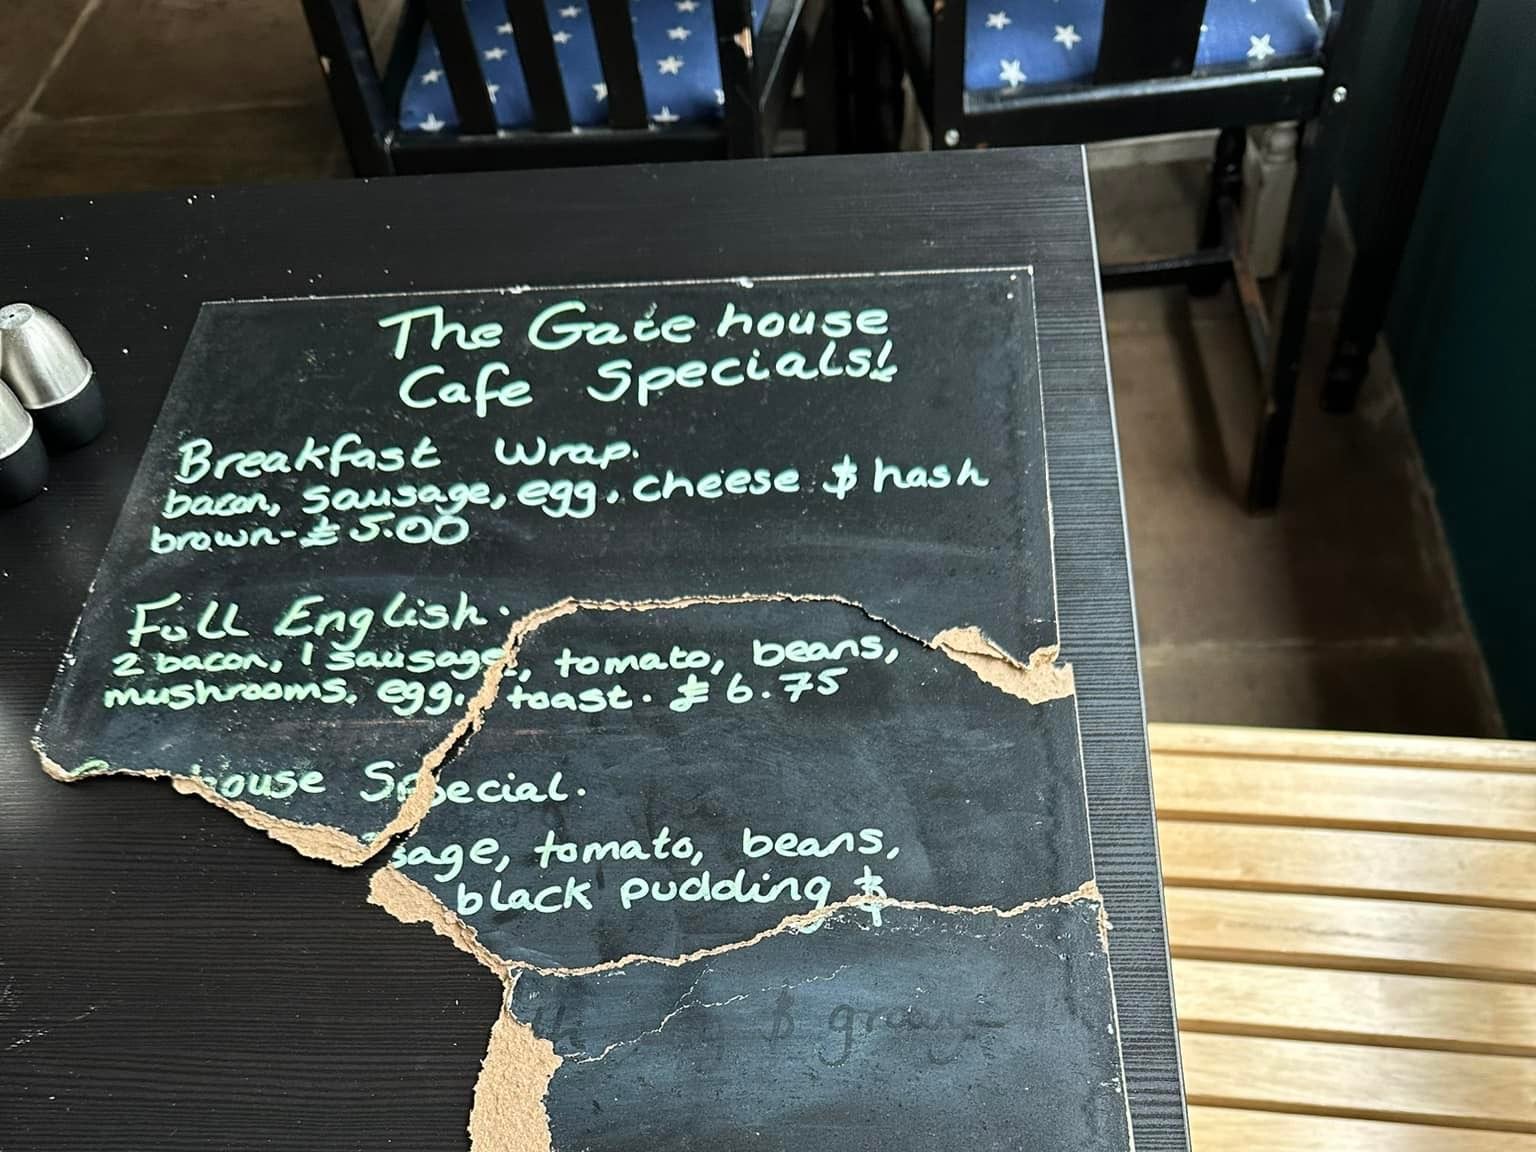 'This is just pointless vandalism': Two cafes in same down targeted by 'youths' within days
